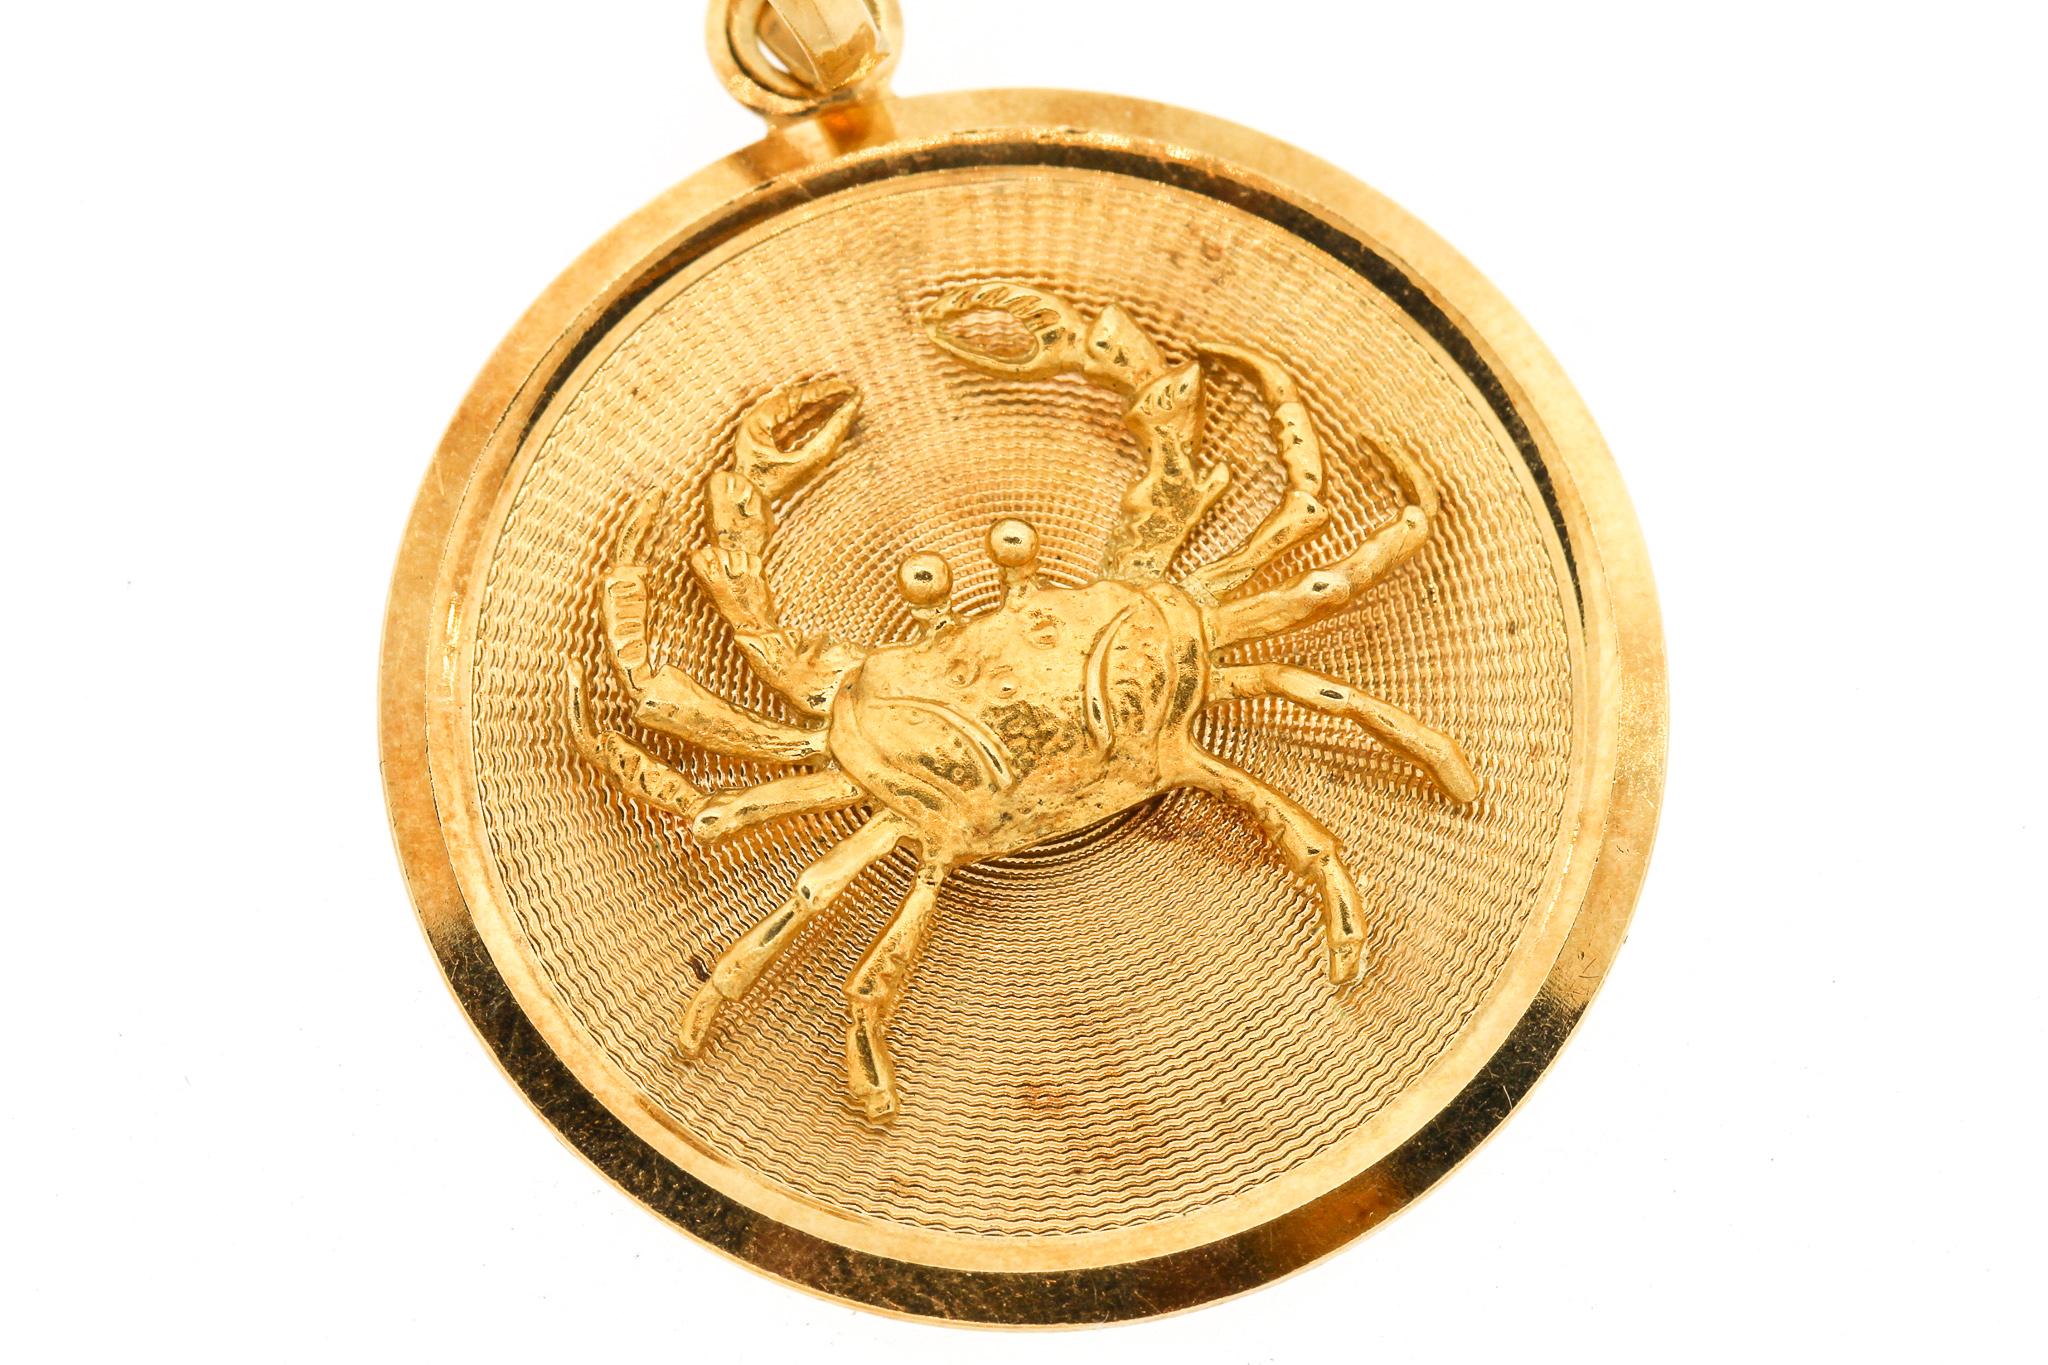 A round 18k gold mid-century Zodiac Cancer disc charm or pendant. The charm depicts a dimensional crab in motion on the front of the charm. The crab is on a textured fluted gold background with a smooth frame around the charm. It is suspended by a